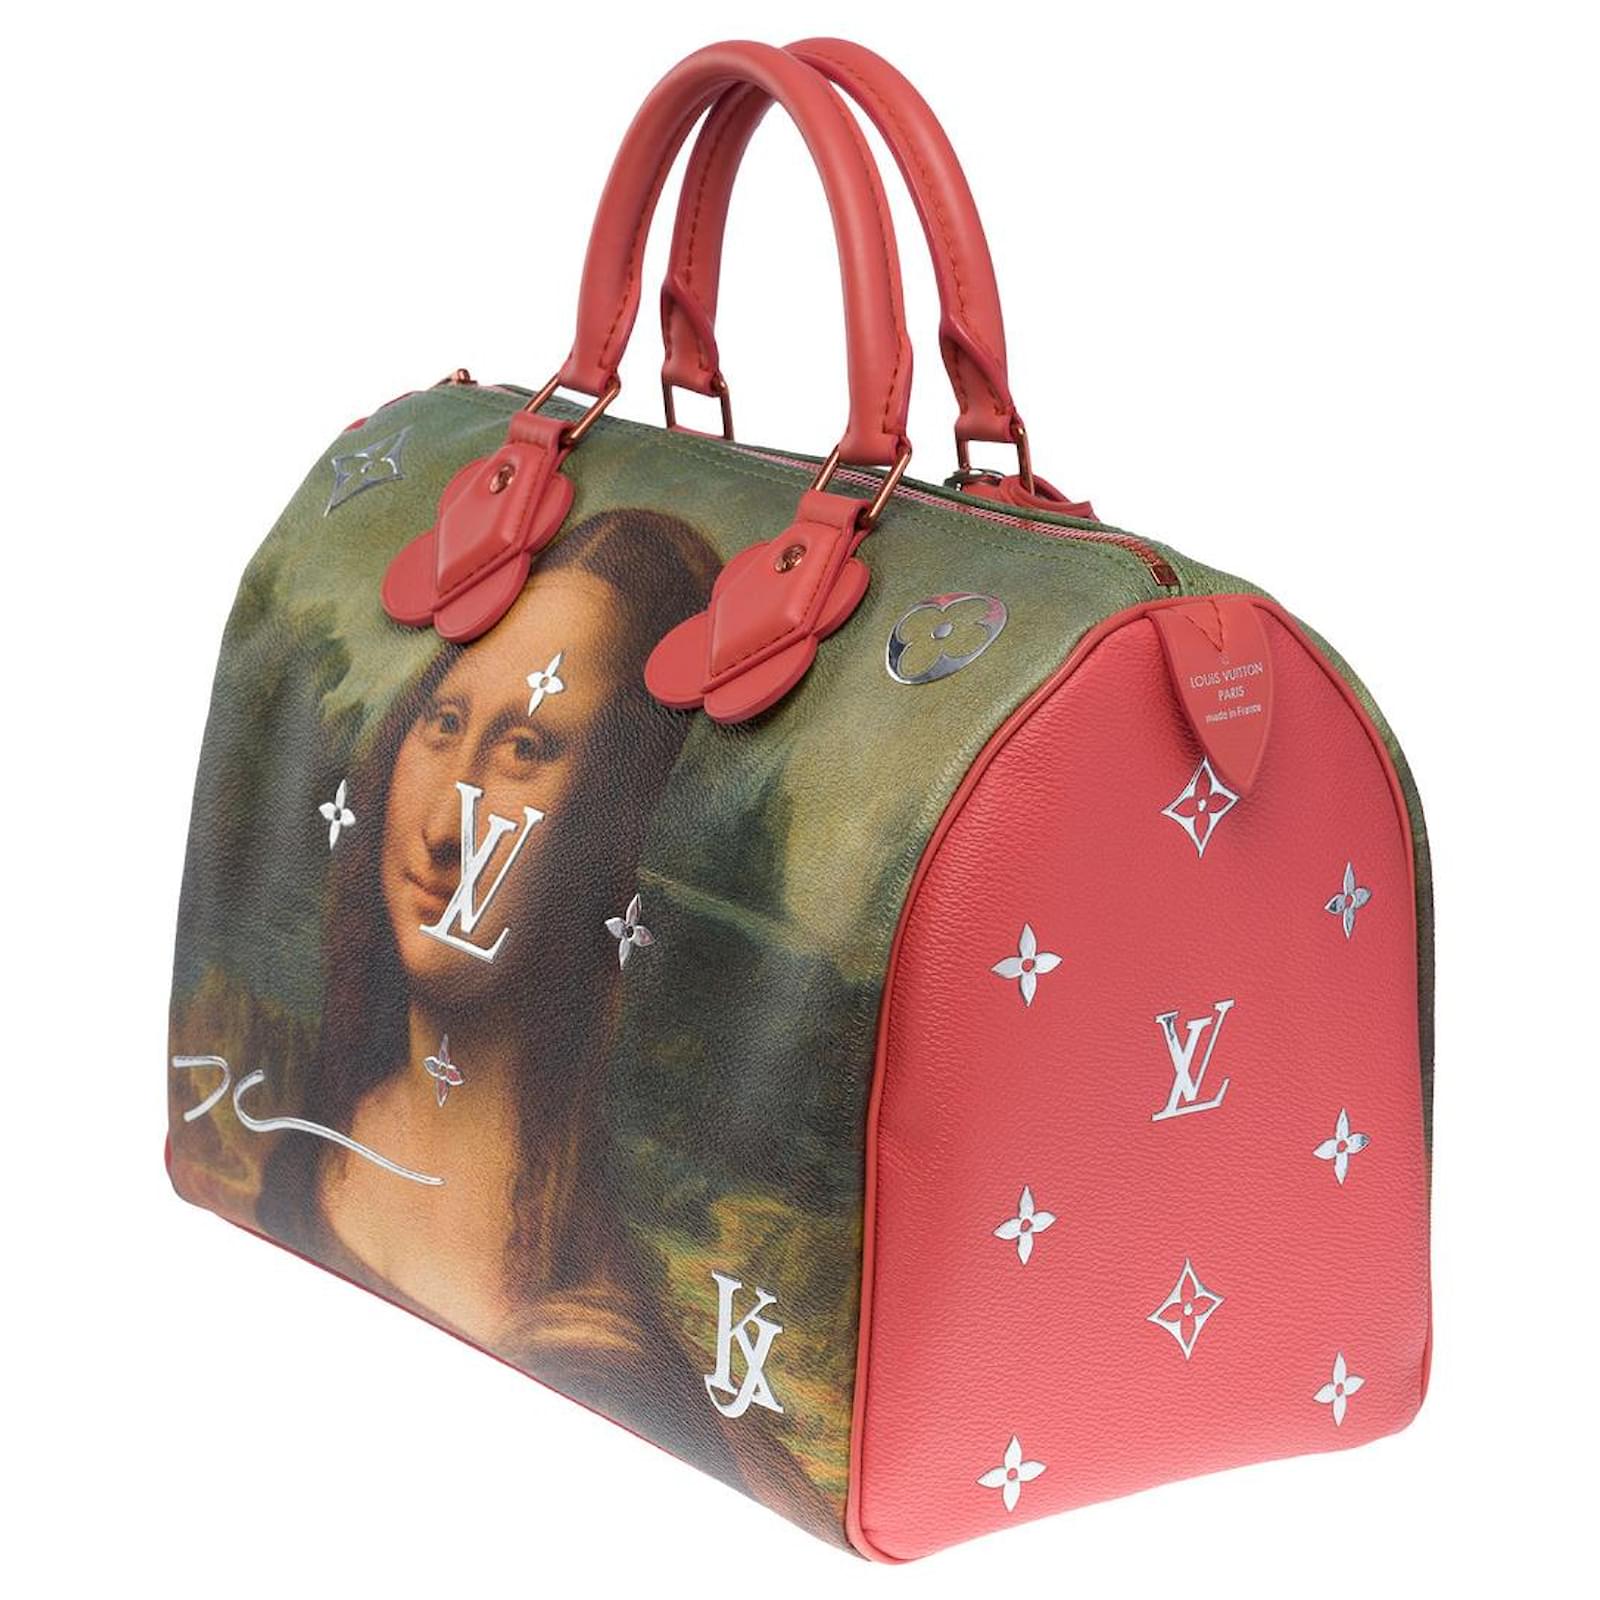 Jeff Koons  Louis Vuitton Da Vinci bag (signed and dated by Jeff